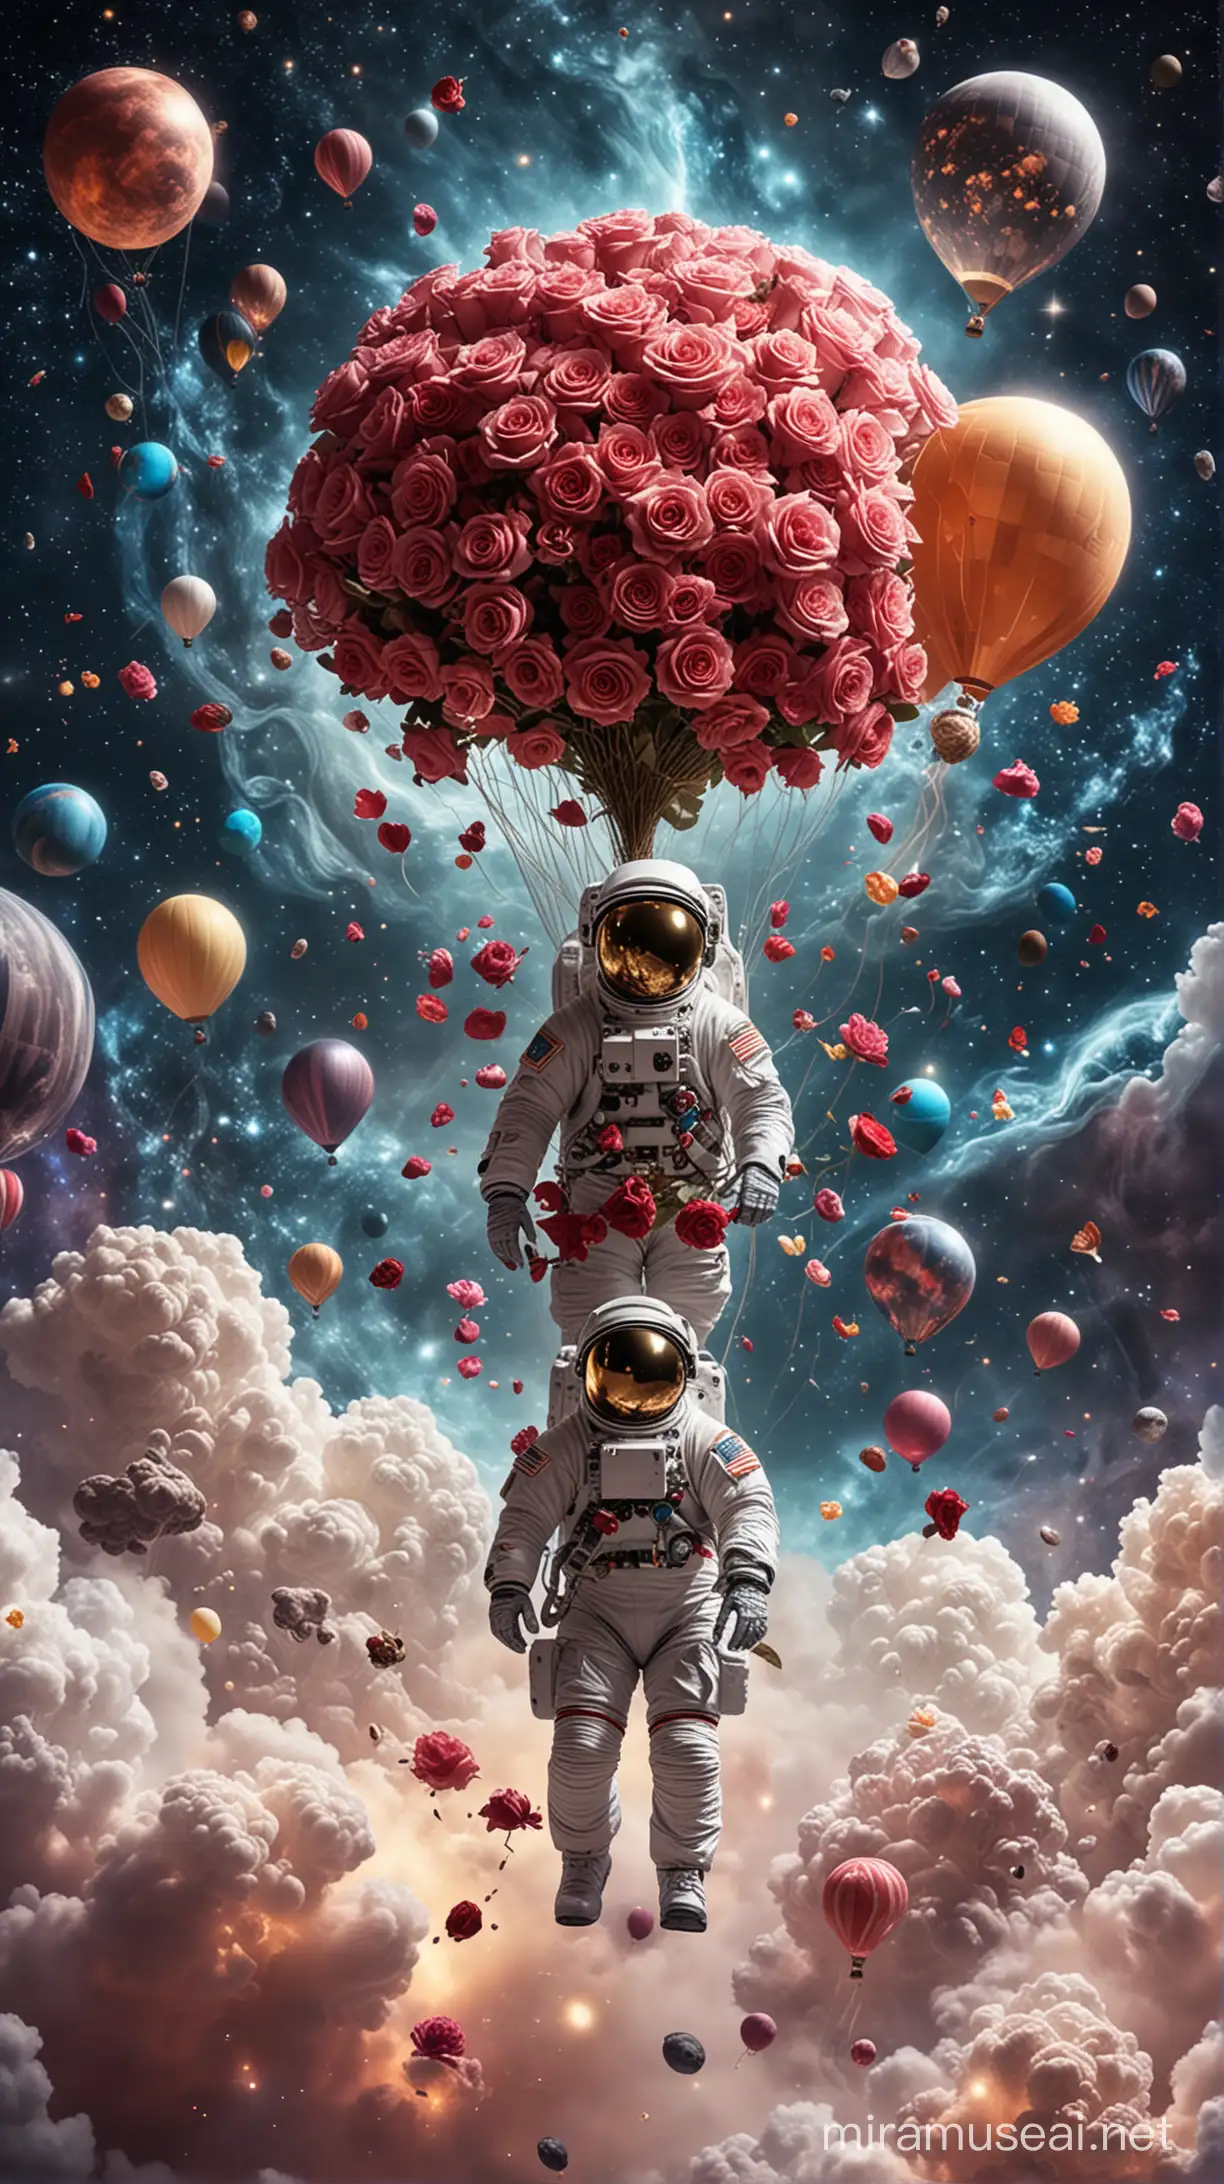 Astronaut Strolling on Clouds with Roses among Celestial Bodies